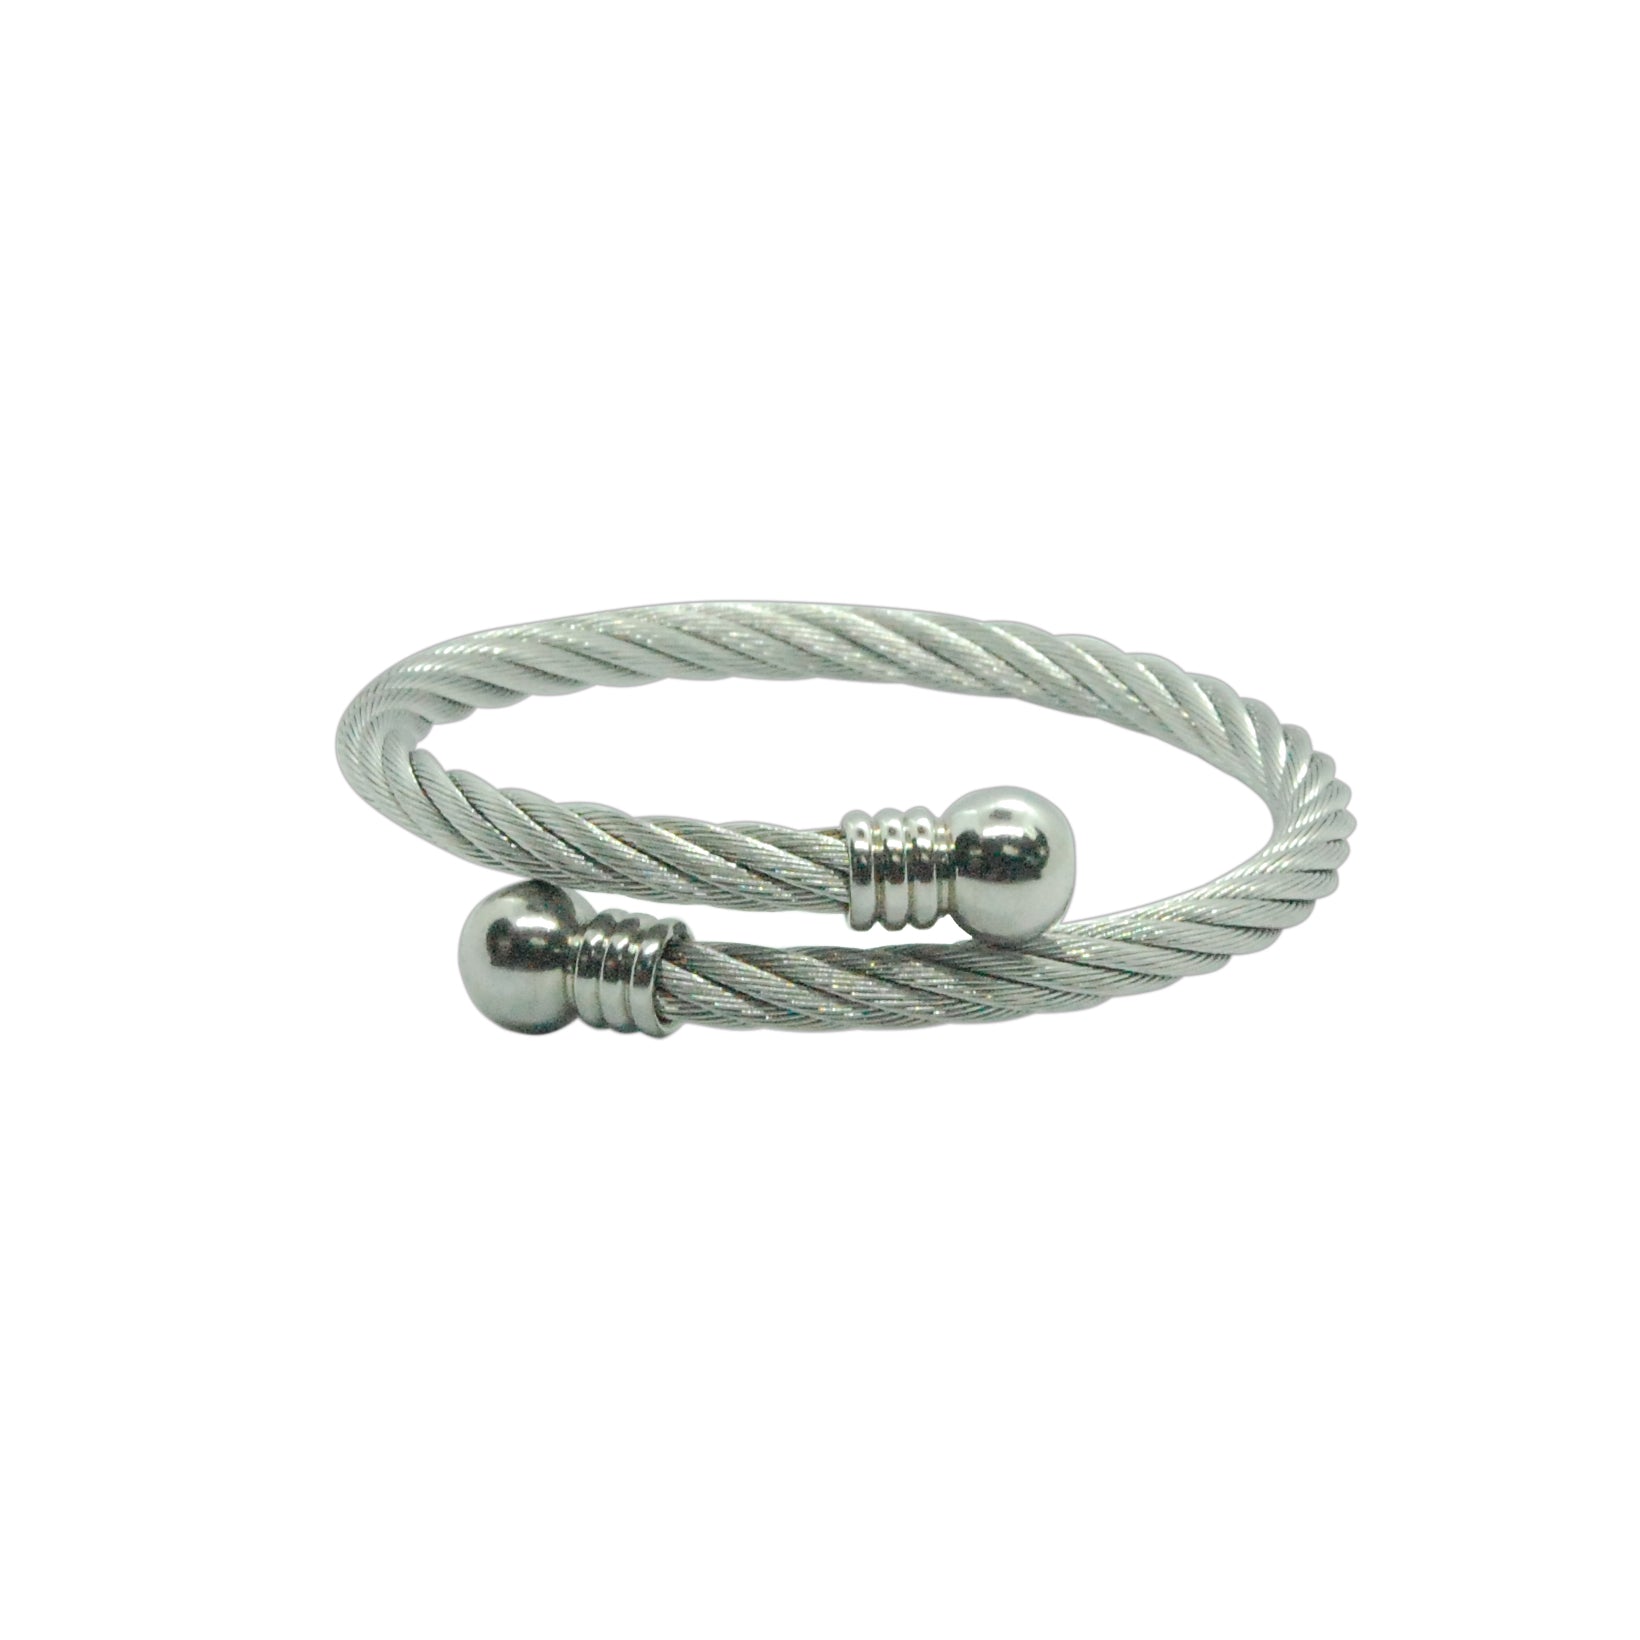 ESBG 5910: Twisted Rope Bangle w/ Round Ends